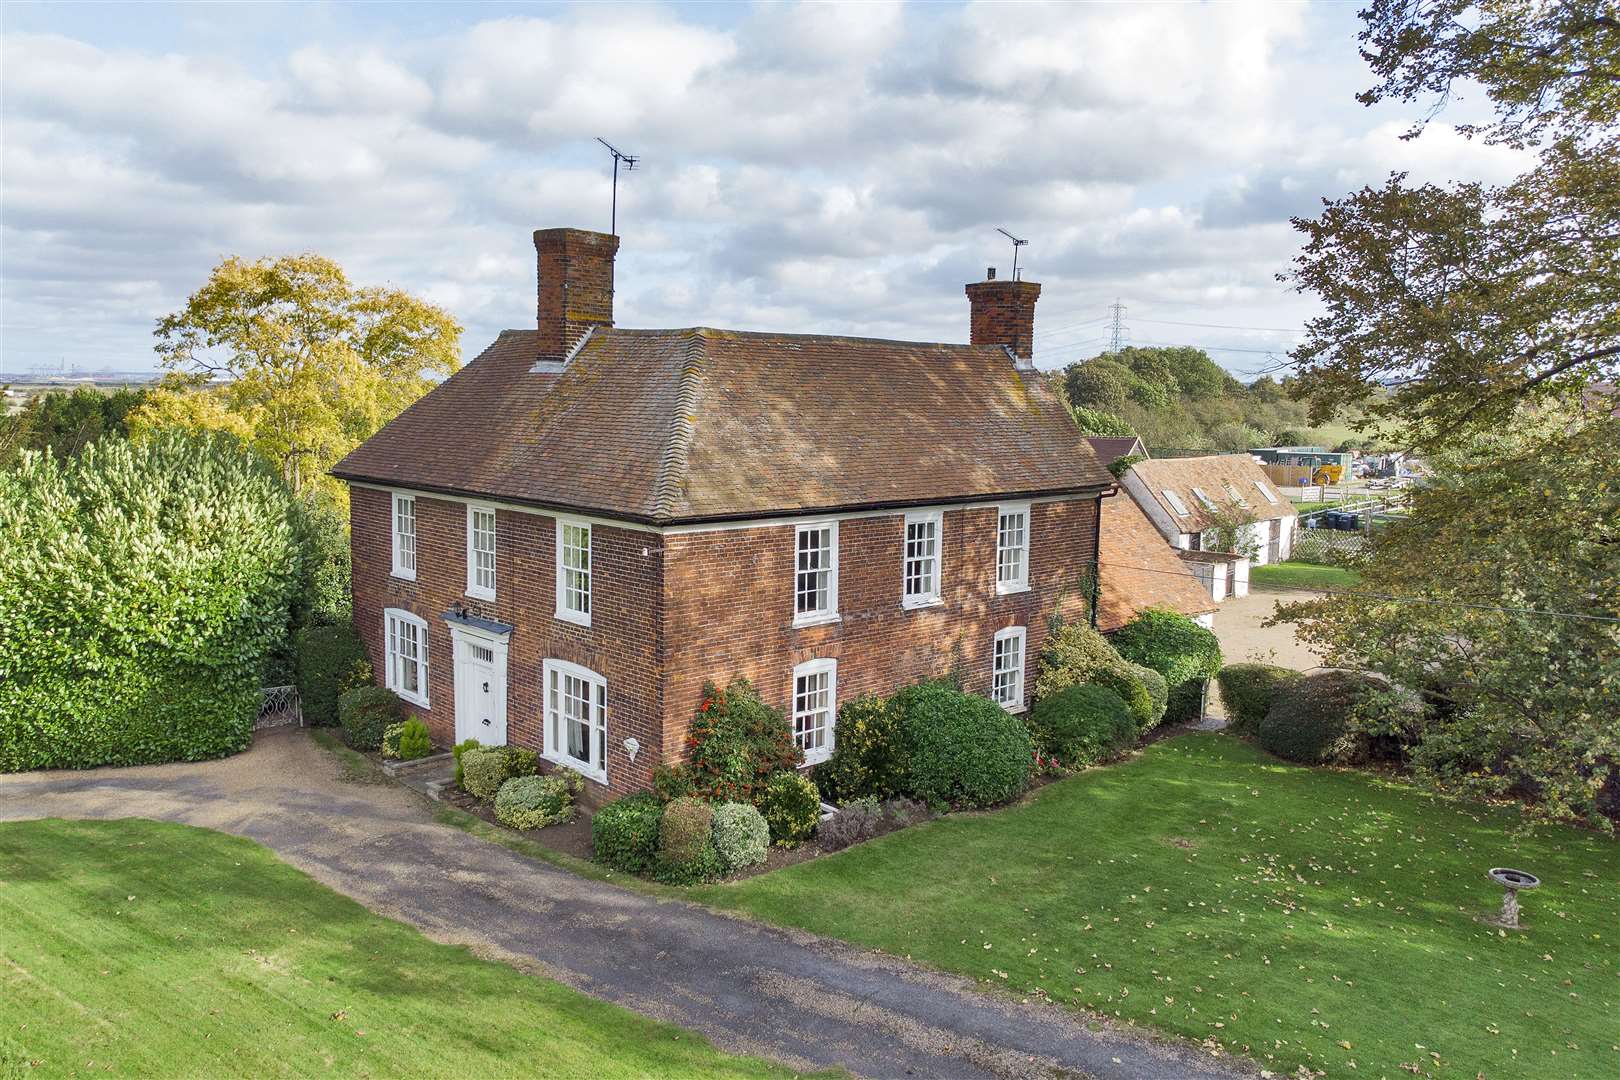 A rare opportunity has arisen t purchase a nine-bedroom Grade II Listed Georgian manor house in the village of Chalk near Gravesend. Photo: BTF Partnership